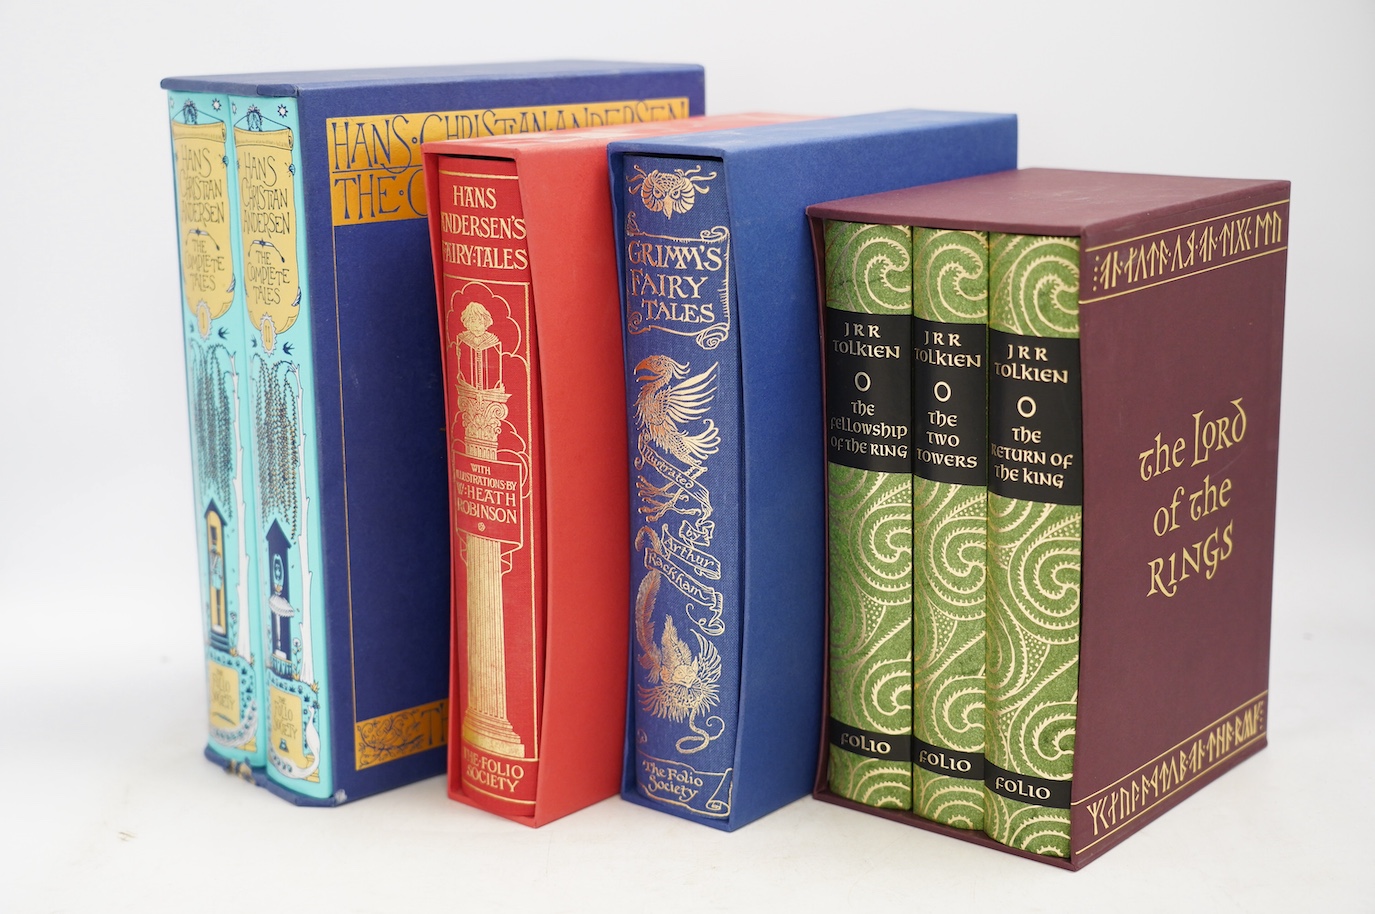 Four Folio Society volumes; two Hans Christian Andersen collections, a Grimm’s Fairy Tales and a Lord of the Rings set. Condition - fair, some wear, mainly to slipcases.